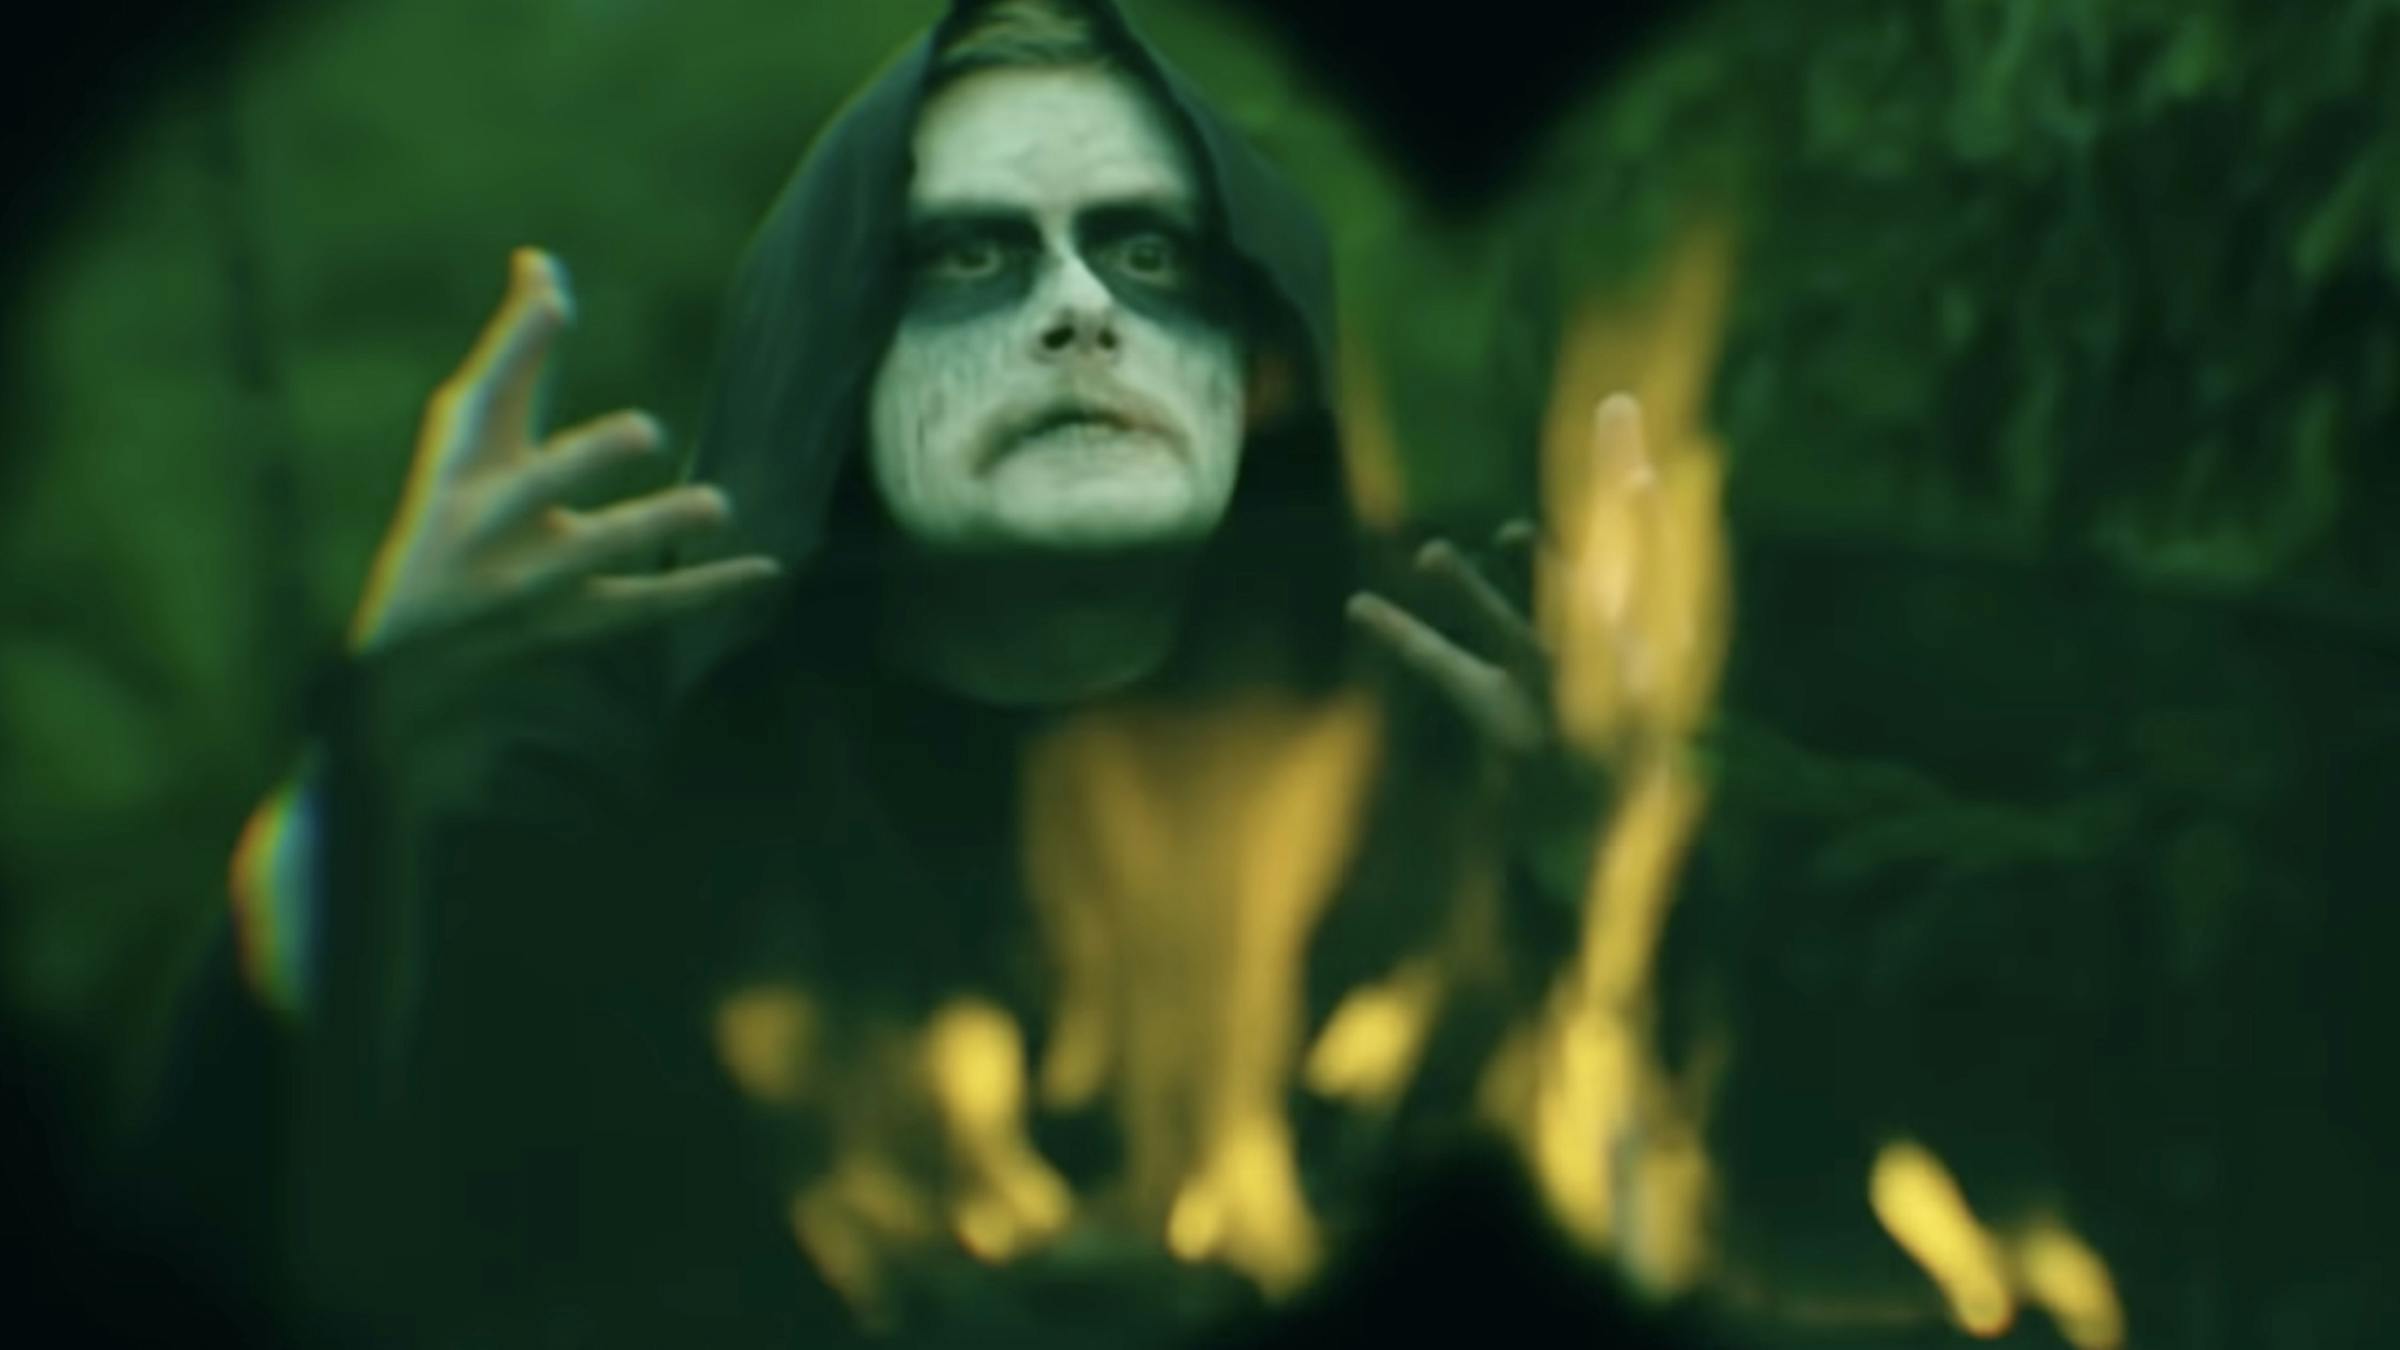 Bokassa don corpsepaint and fake blood for hilarious new Burn It All video